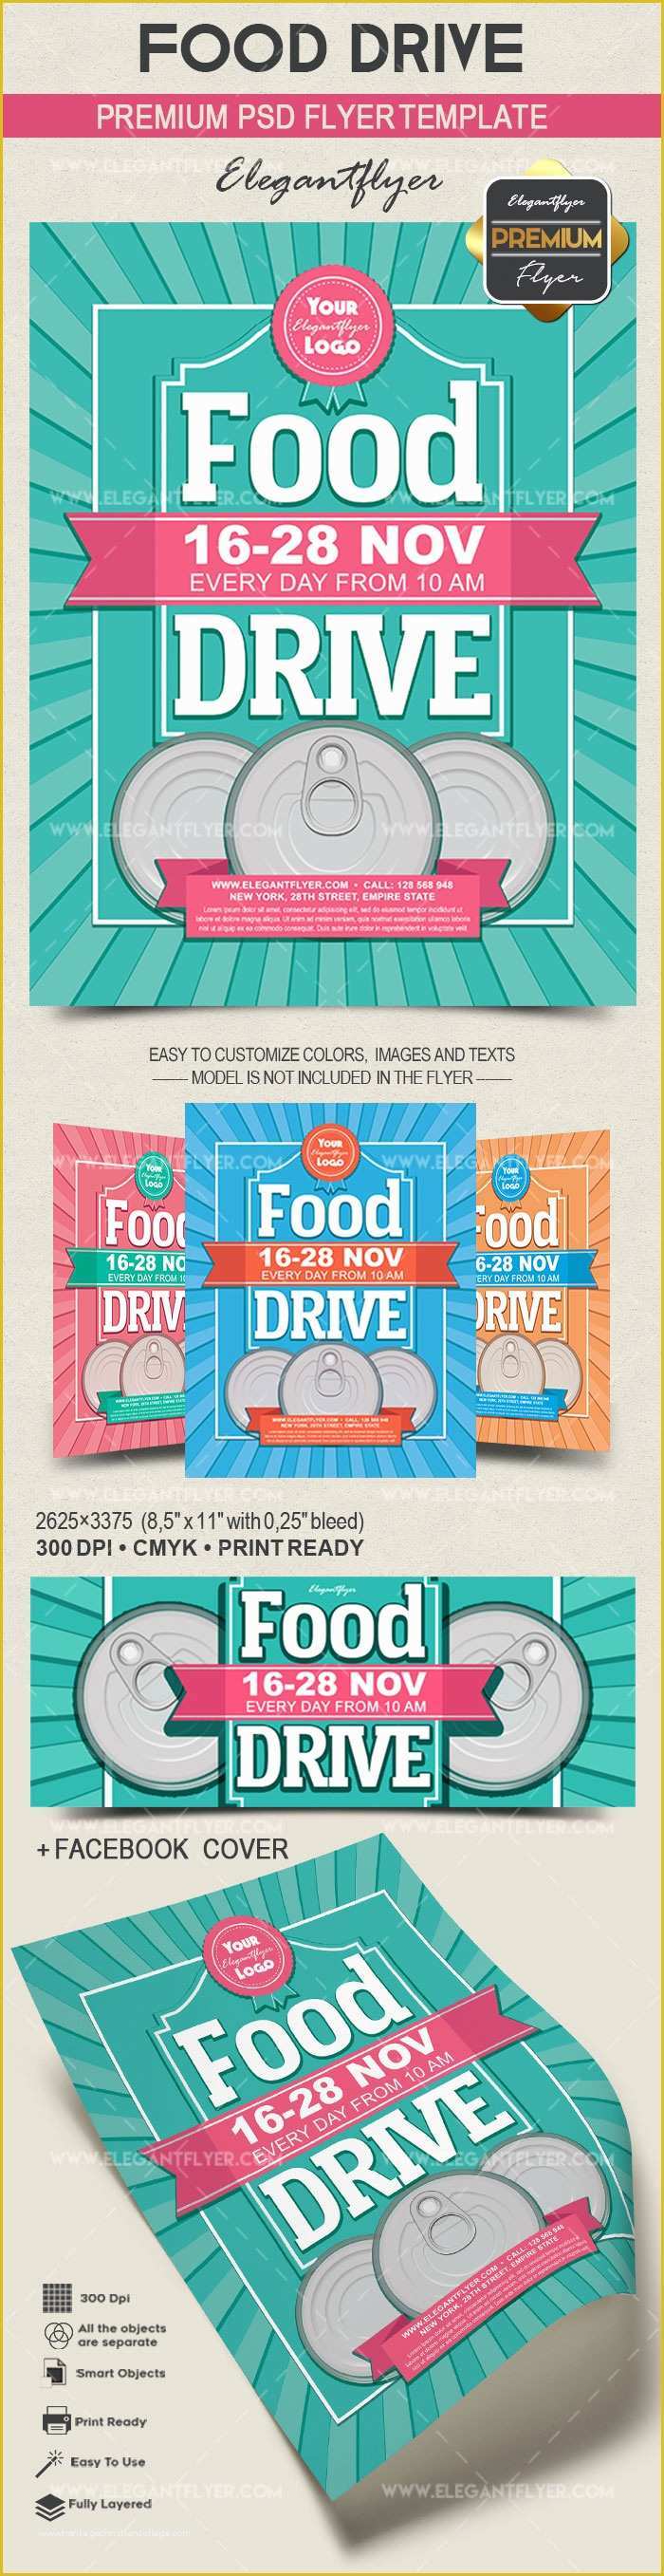 Free Can Food Drive Flyer Template Of Food Drive – Flyer Psd Template – by Elegantflyer